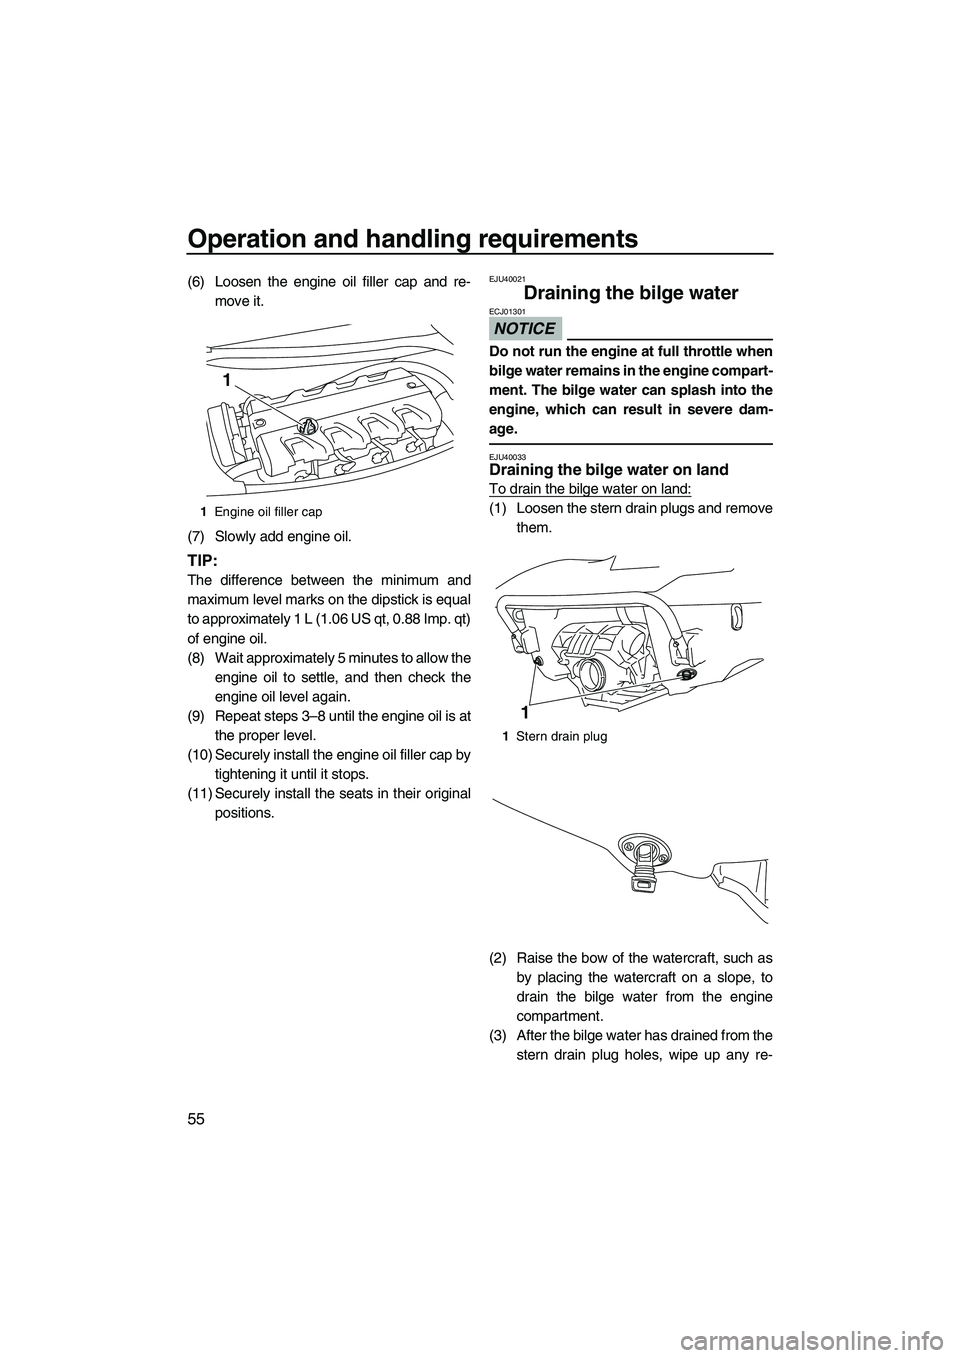 YAMAHA FX HO CRUISER 2010  Owners Manual Operation and handling requirements
55
(6) Loosen the engine oil filler cap and re-
move it.
(7) Slowly add engine oil.
TIP:
The difference between the minimum and
maximum level marks on the dipstick 